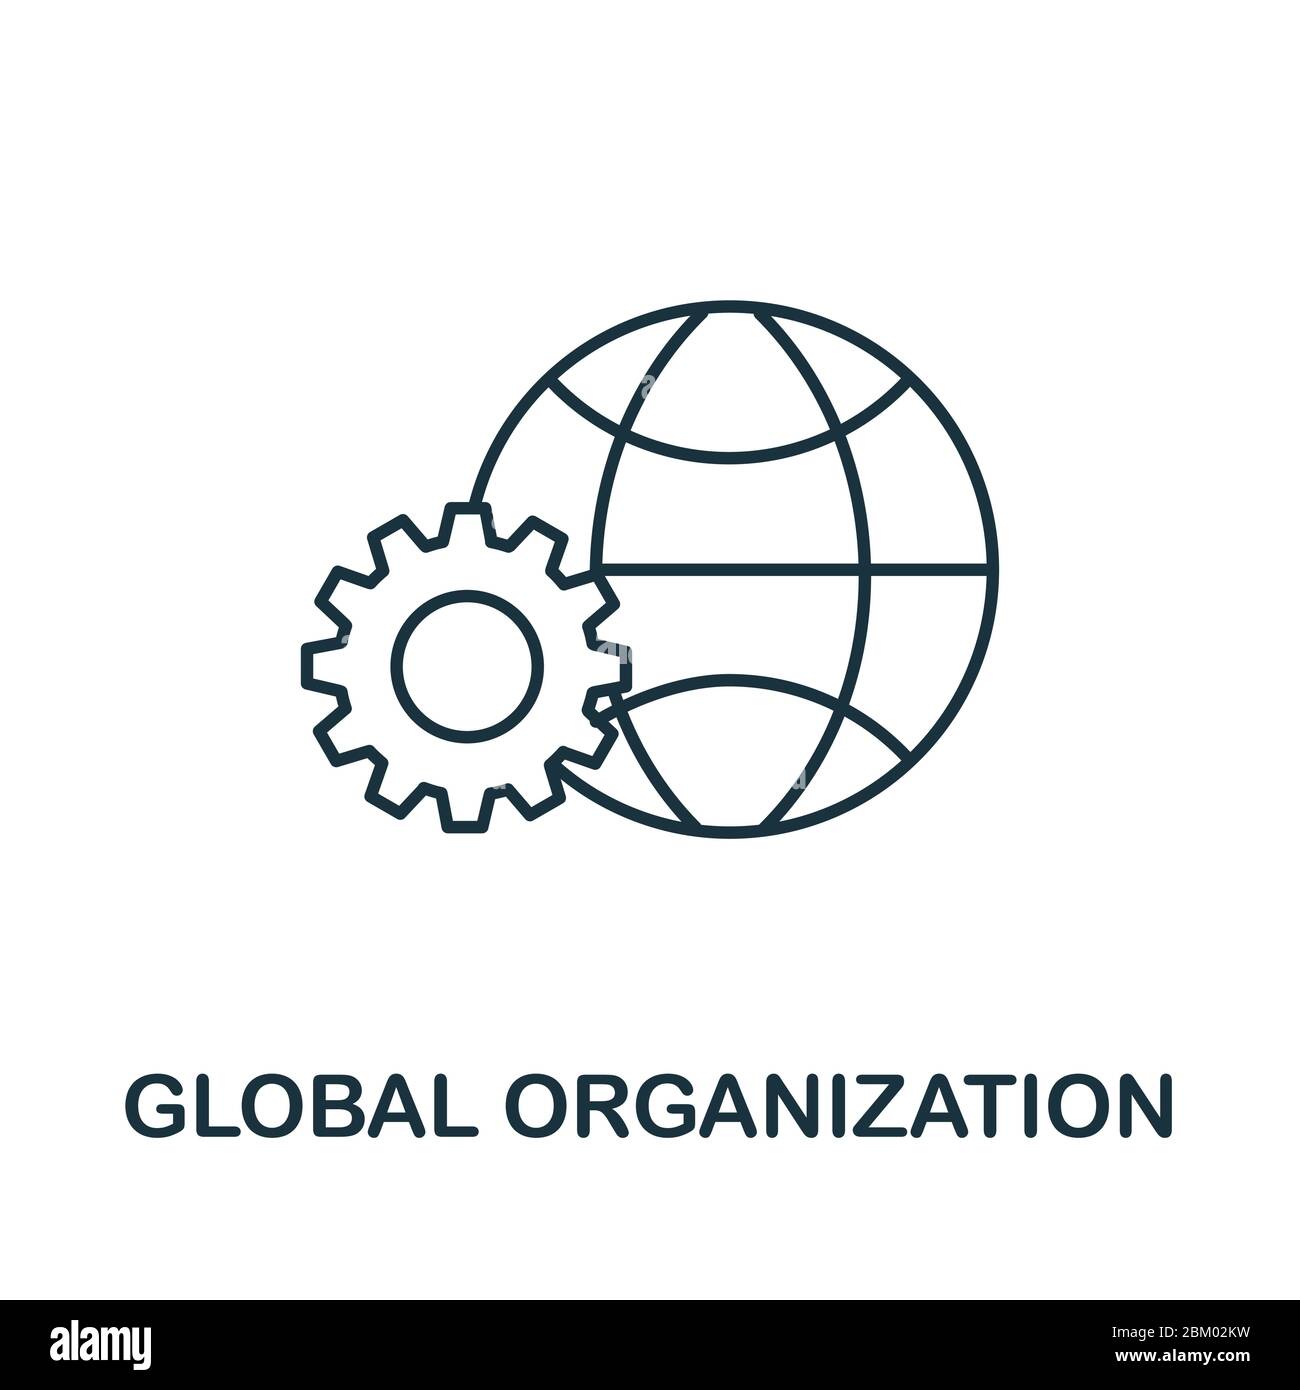 Global Organization icon from global business collection. Simple line Global Organization icon for templates, web design and infographics Stock Vector